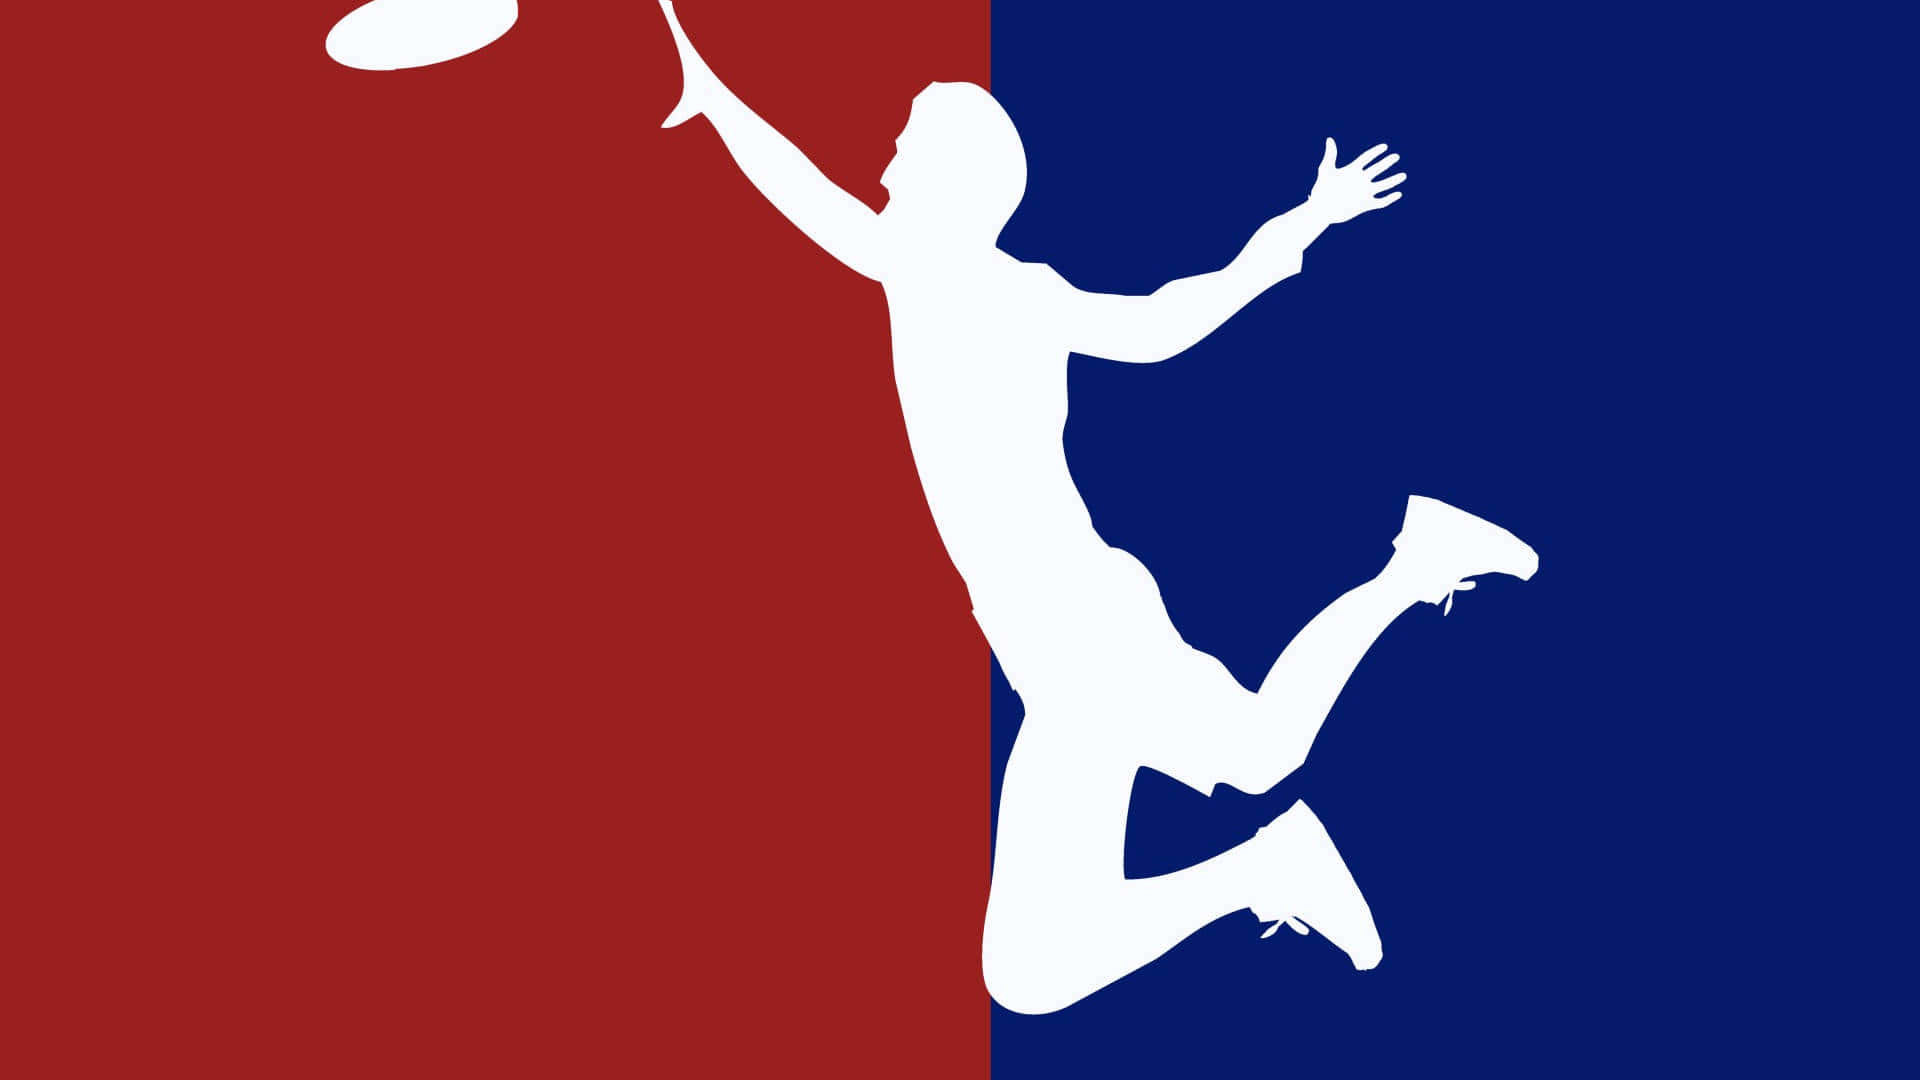 Red And Blue Vector Art 1920x1080 Ultimate Frisbee Background